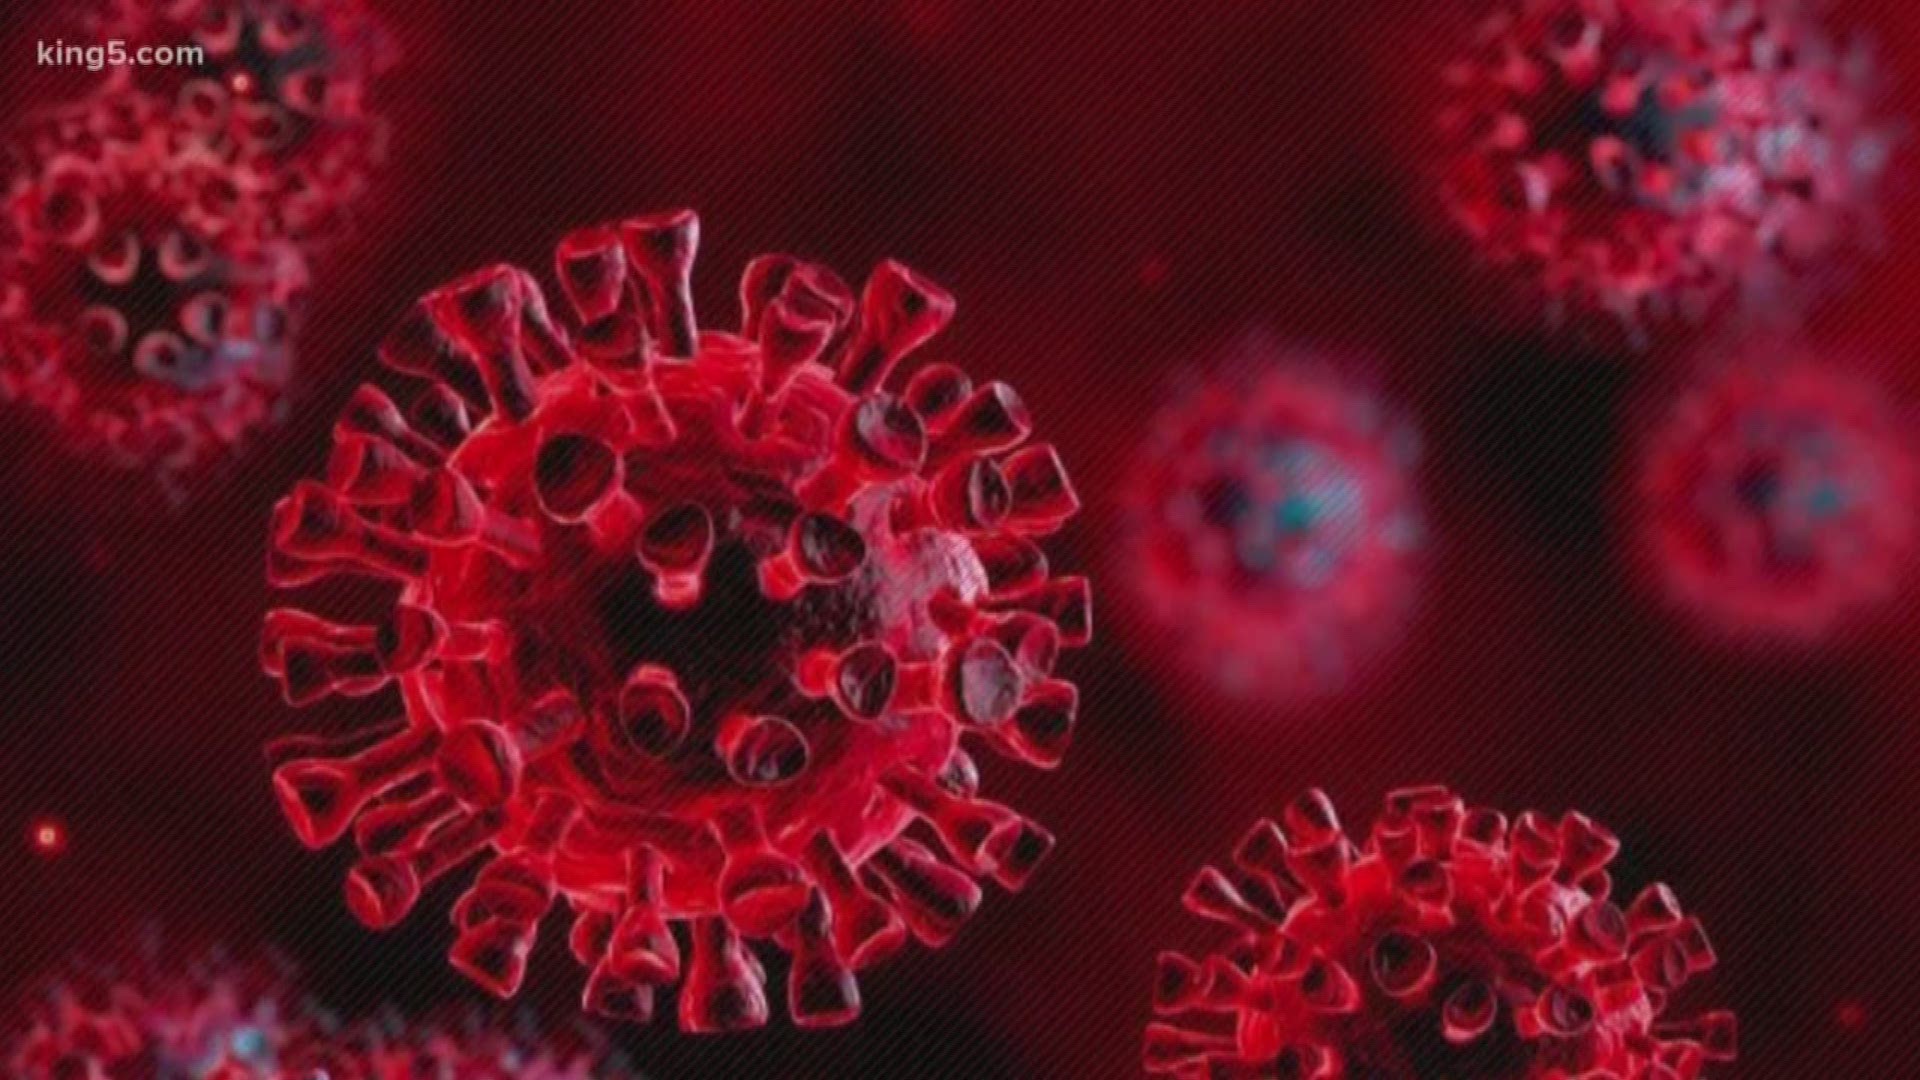 Two more people have been diagnosed with the 2019 novel coronavirus (COVID-19), Washington health officers announced Friday night.